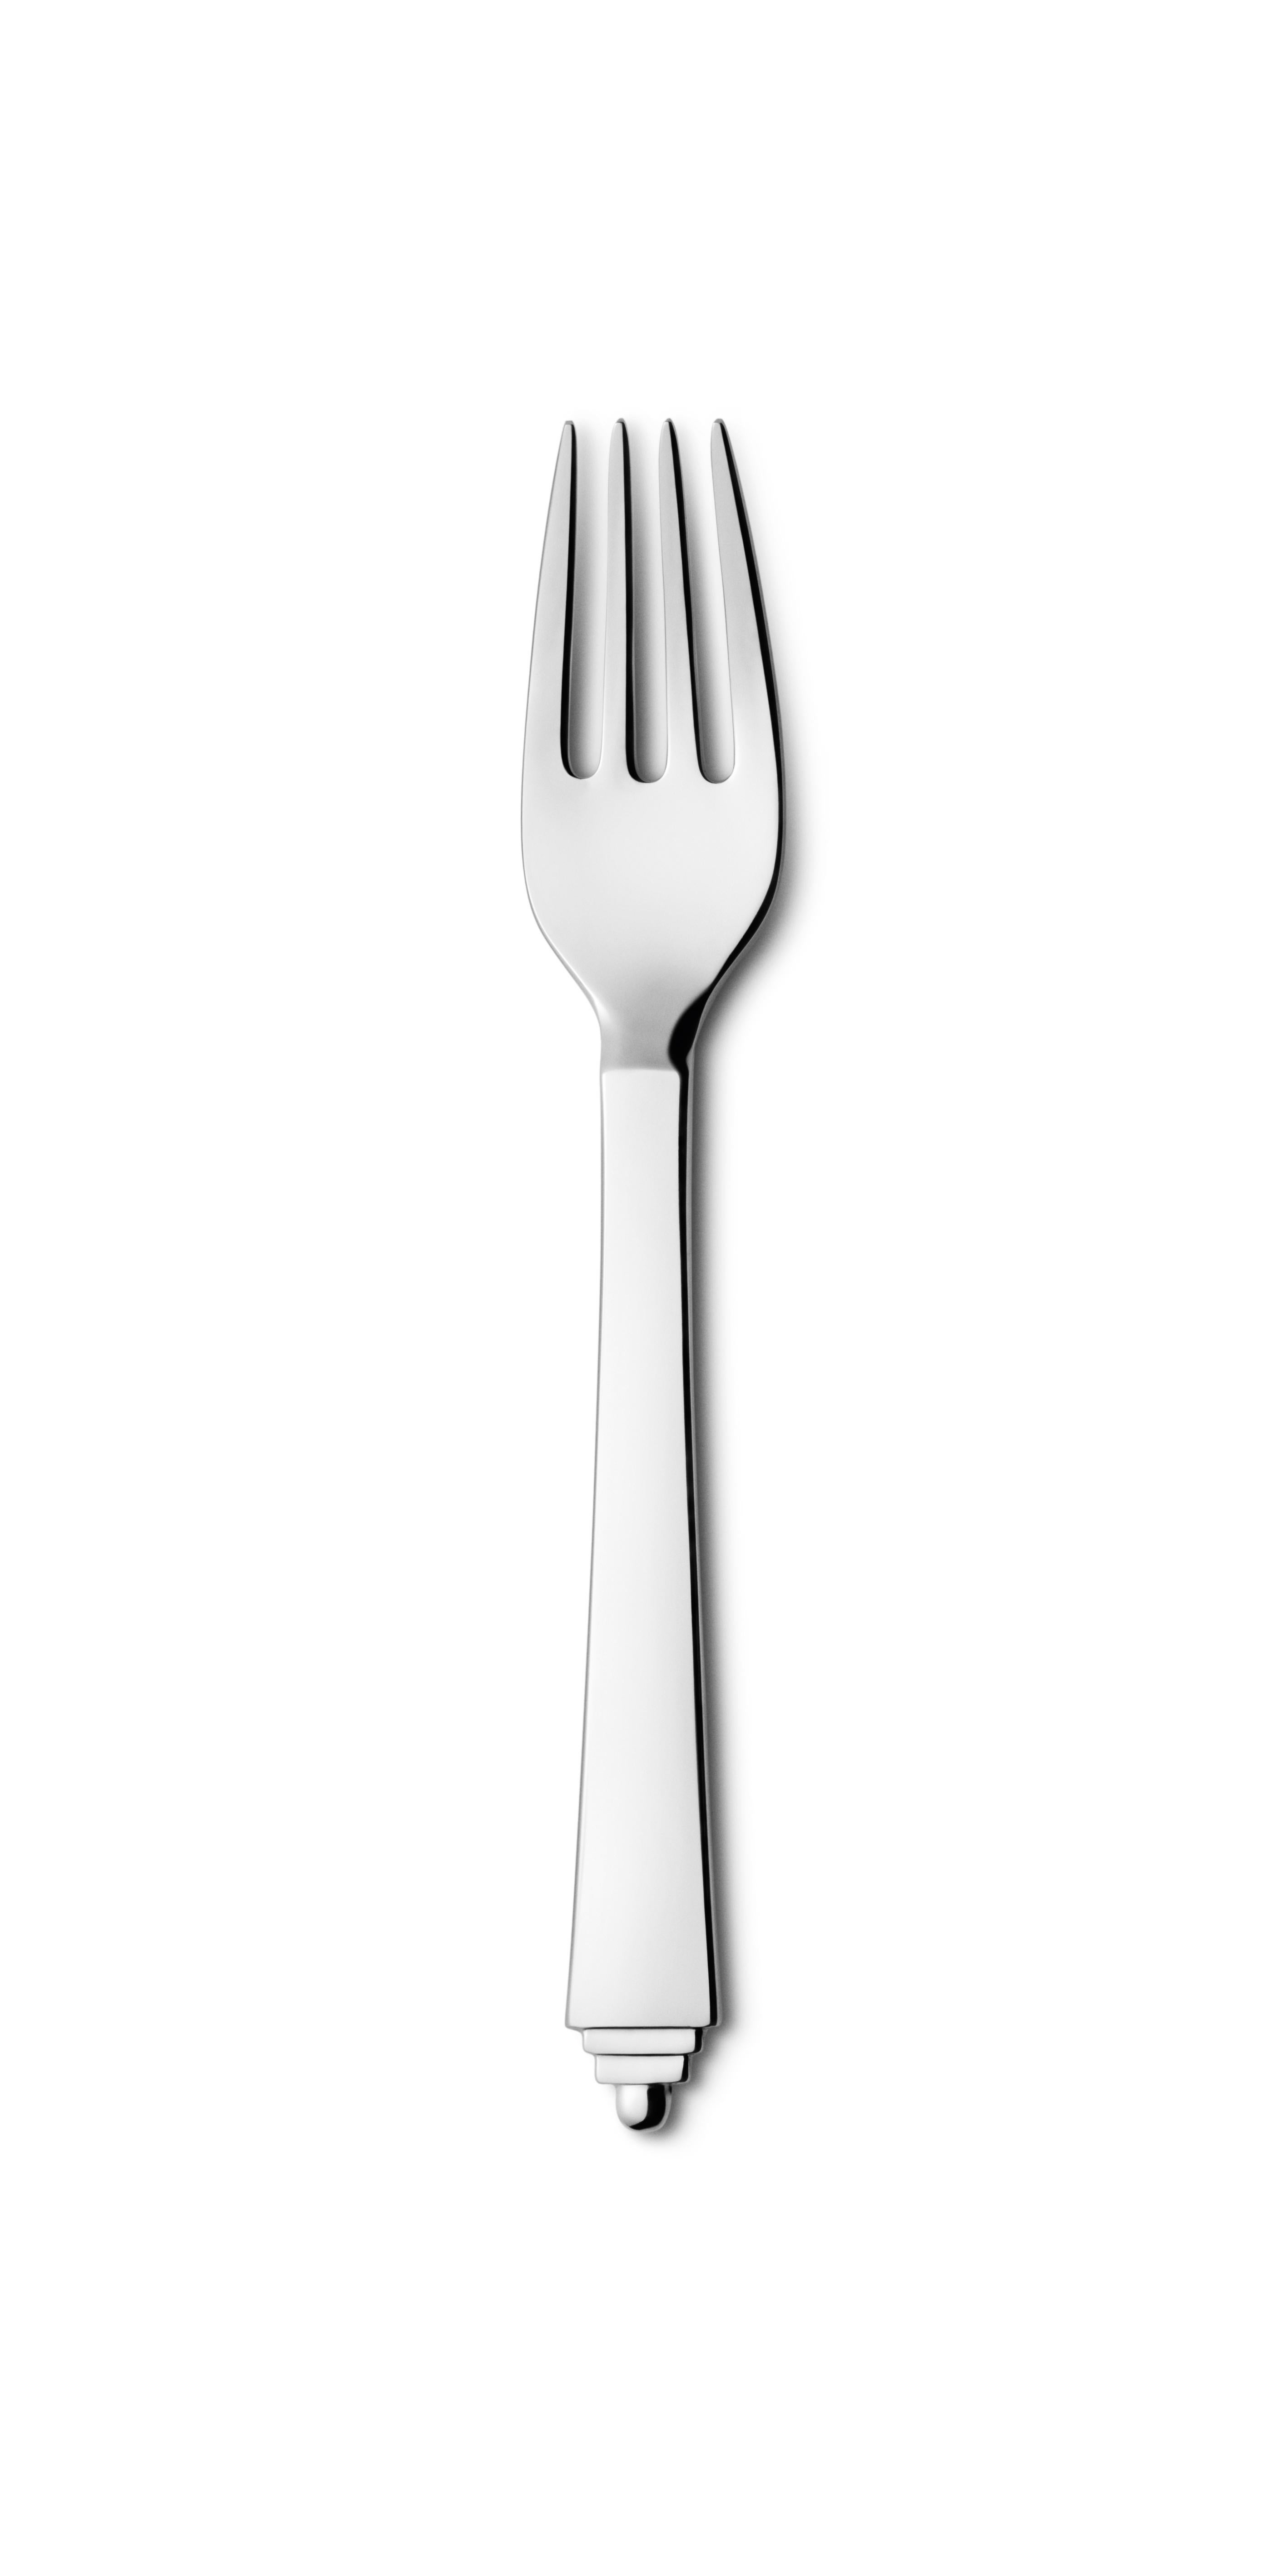 Stainless steel mirror finish three-piece cutlery set for children with a knife, fork and spoon.